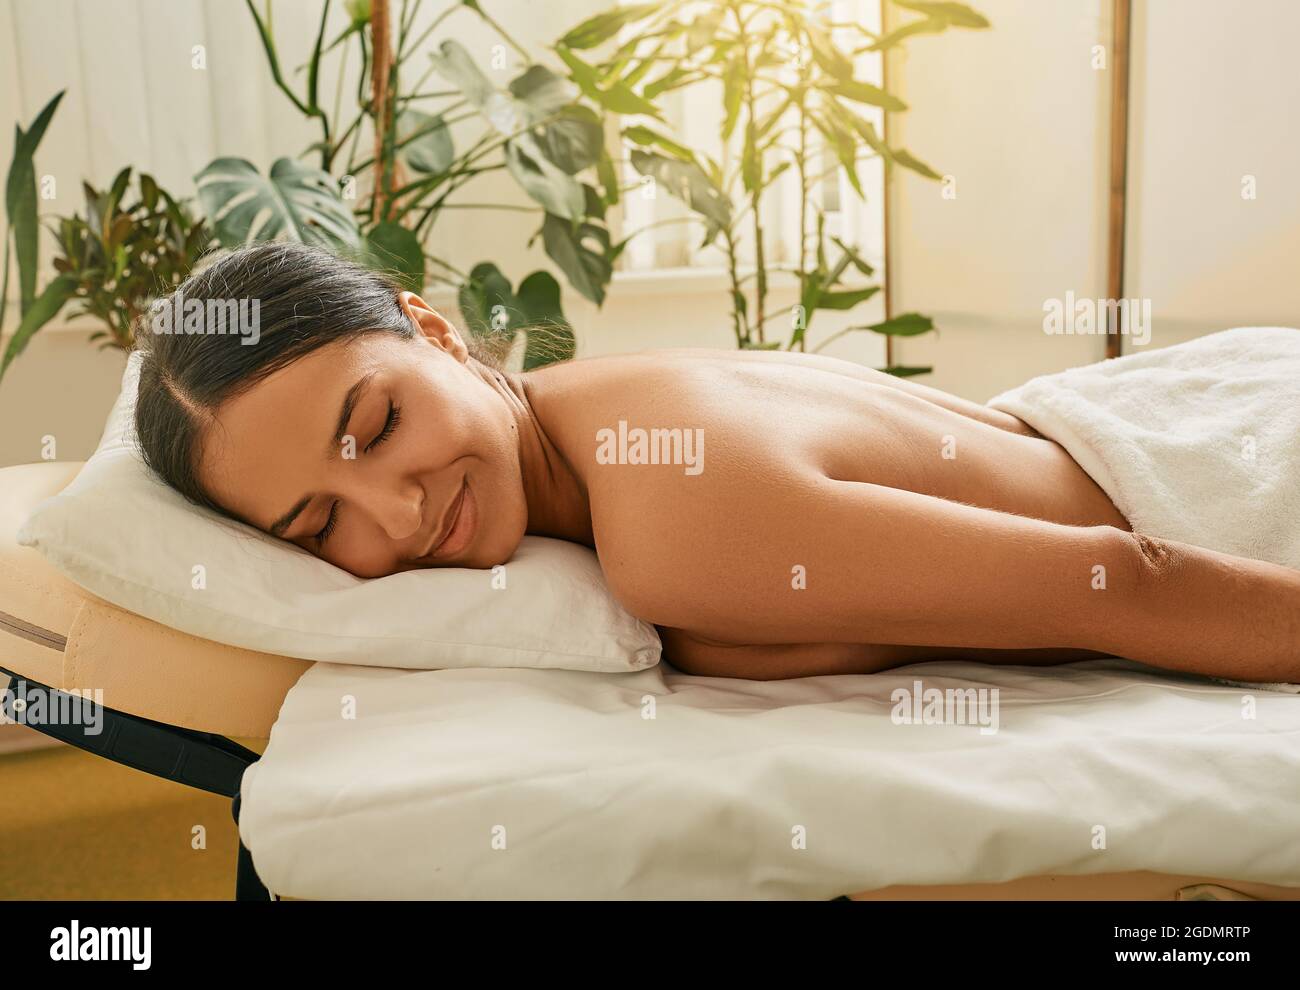 massage therapy and body care.Young woman enjoys massage at spa. Relaxing back and body massage at wellness. Time of rela Stock Photo